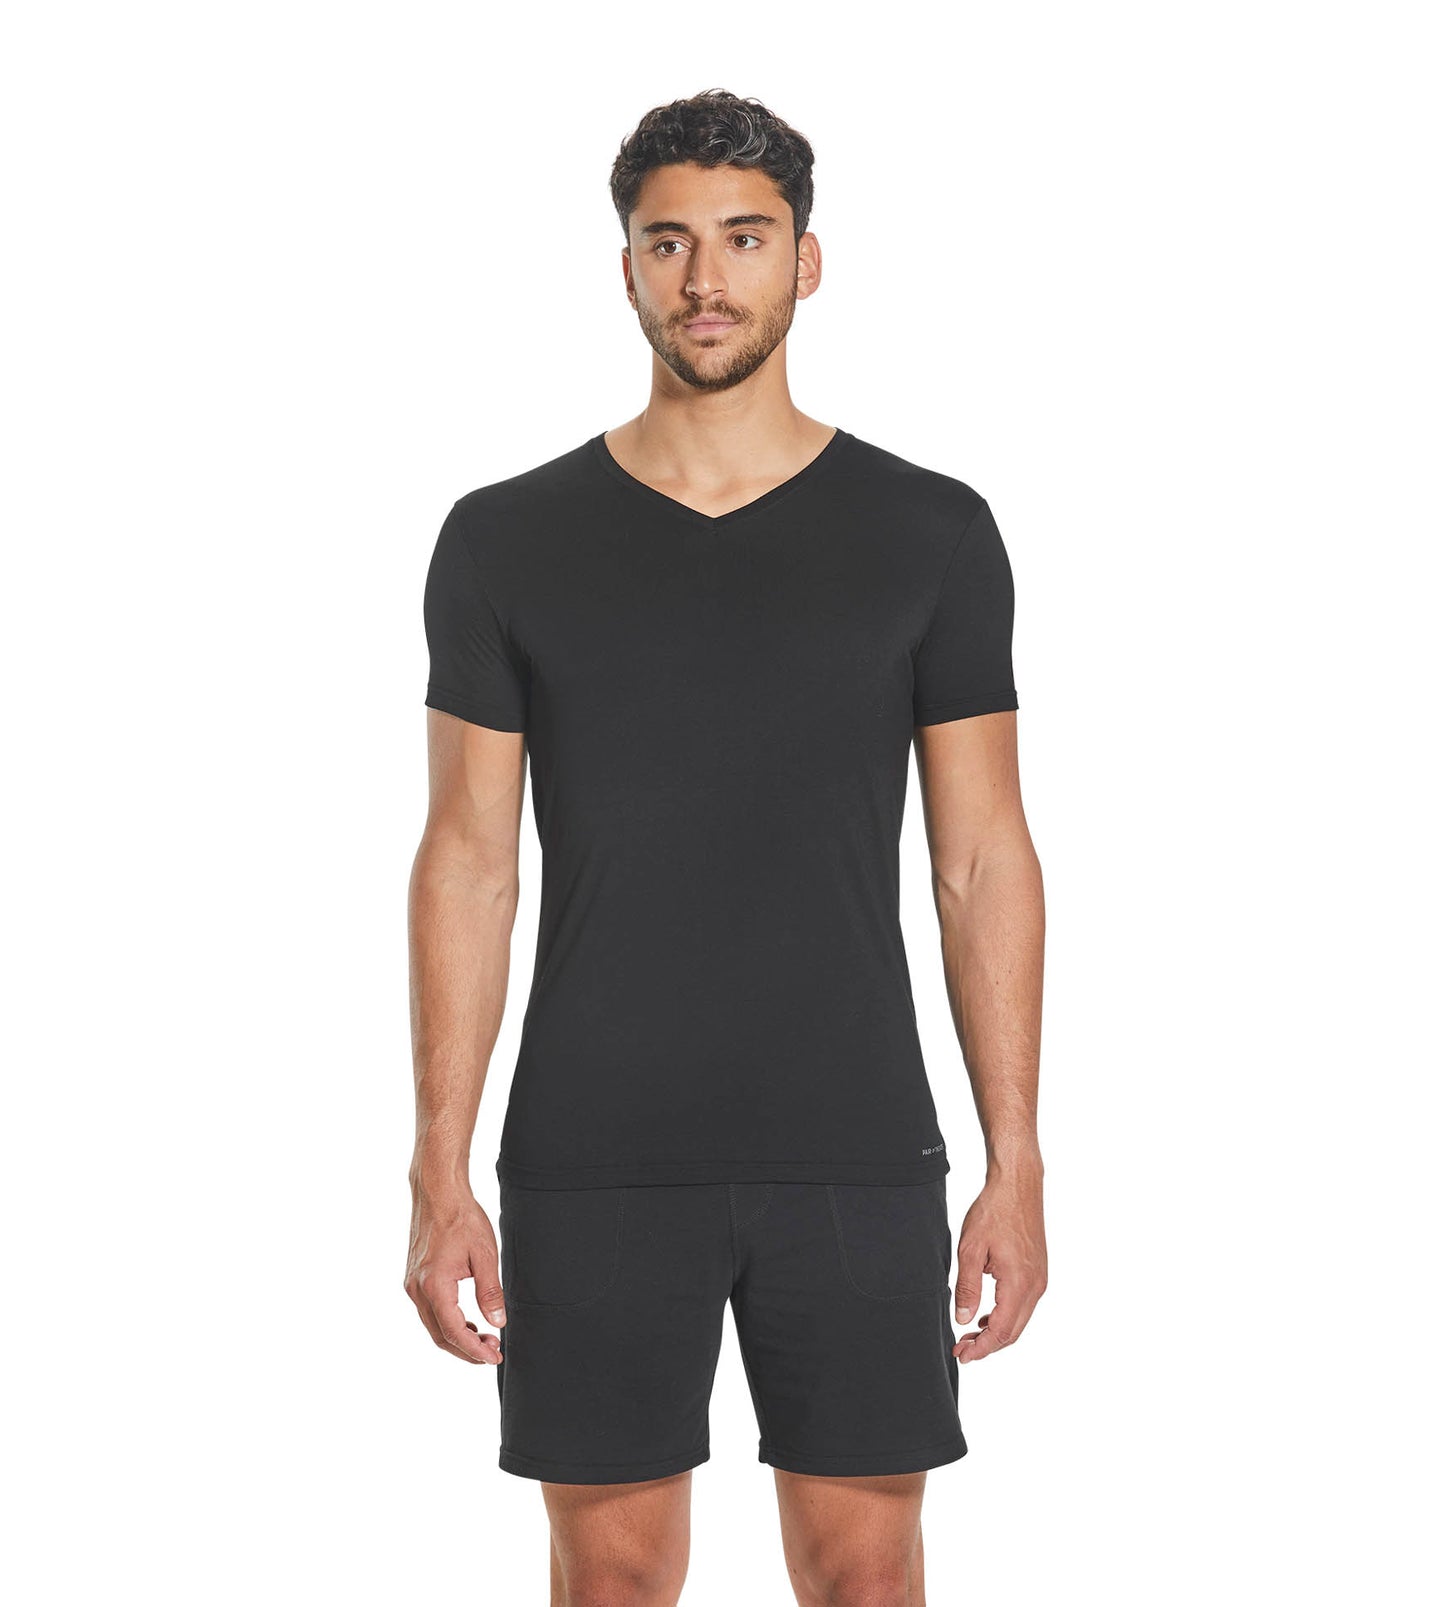 SuperSoft V-Neck Undershirt 2 Pack - Black - Pair of Thieves